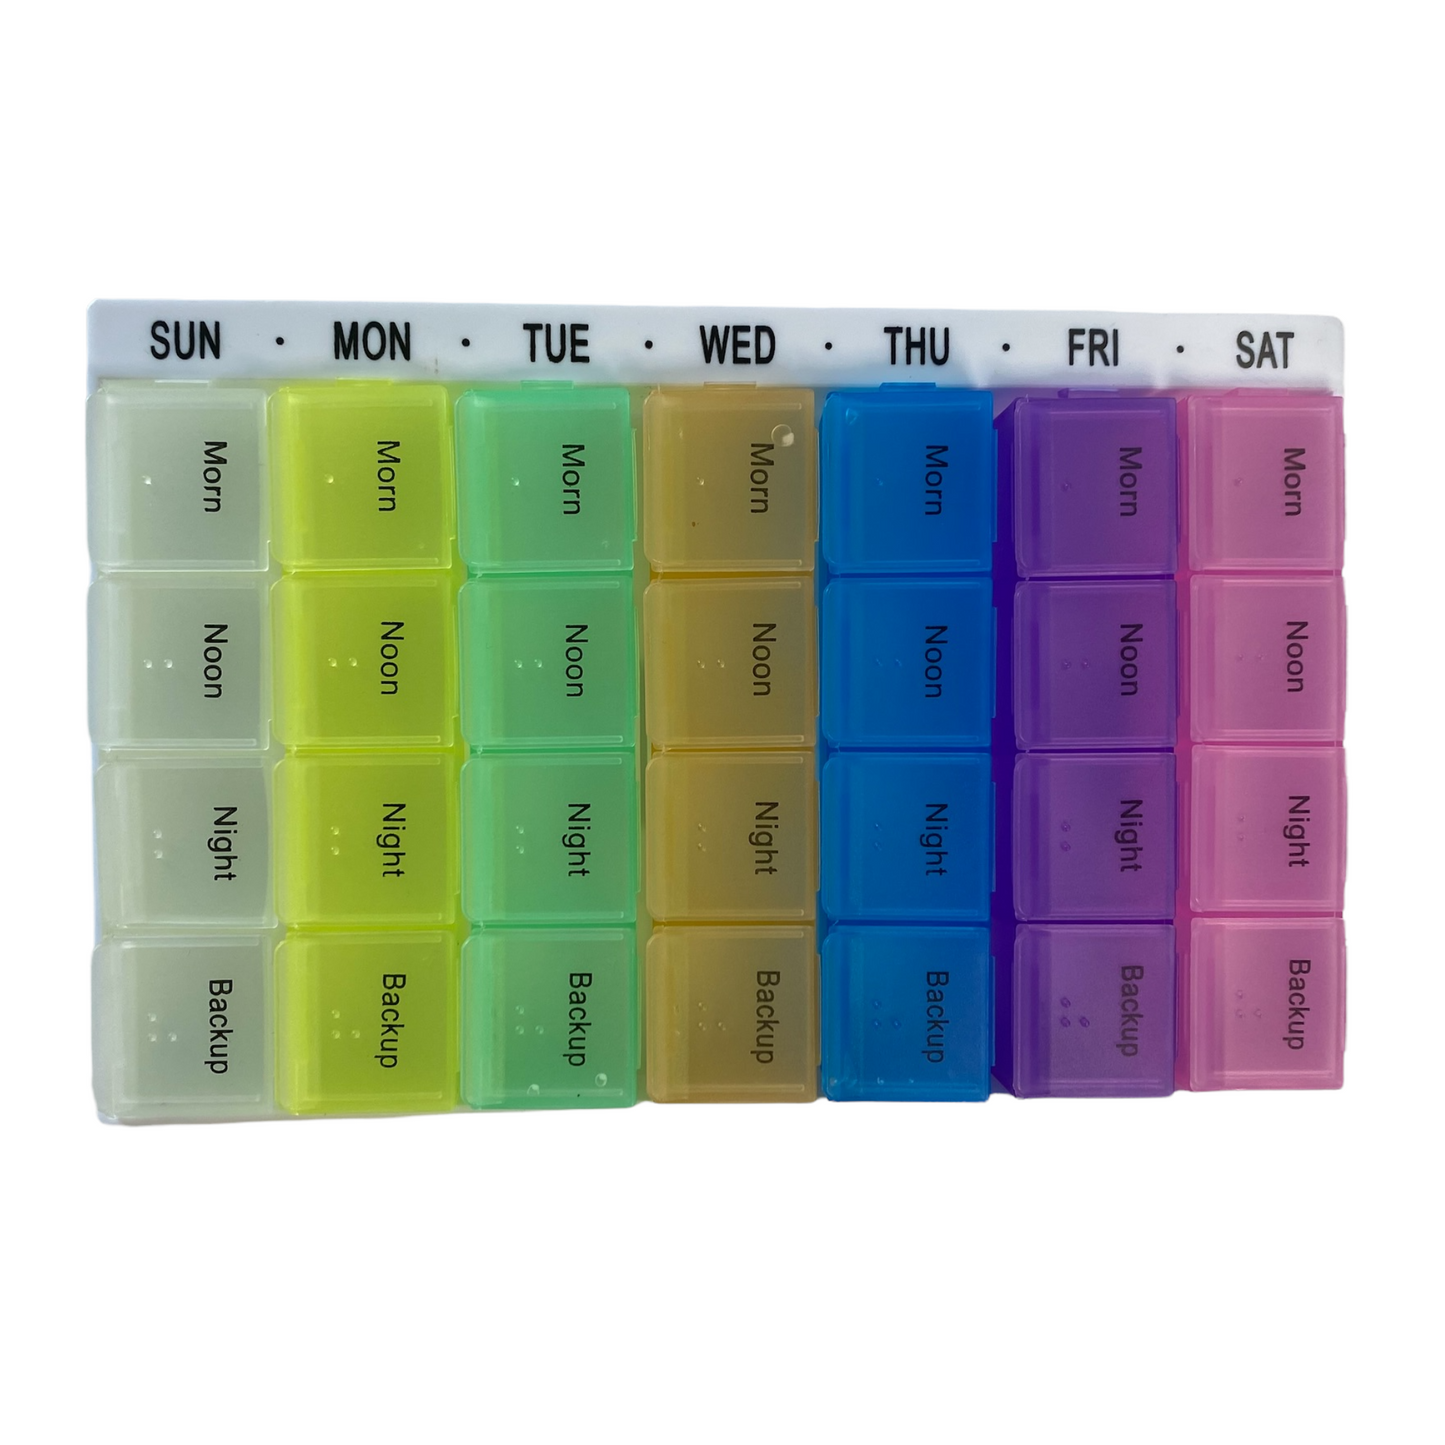 7 Day Pill Box — 4 Doses Daily White case Managing Medications SPIRIT SPARKPLUGS   